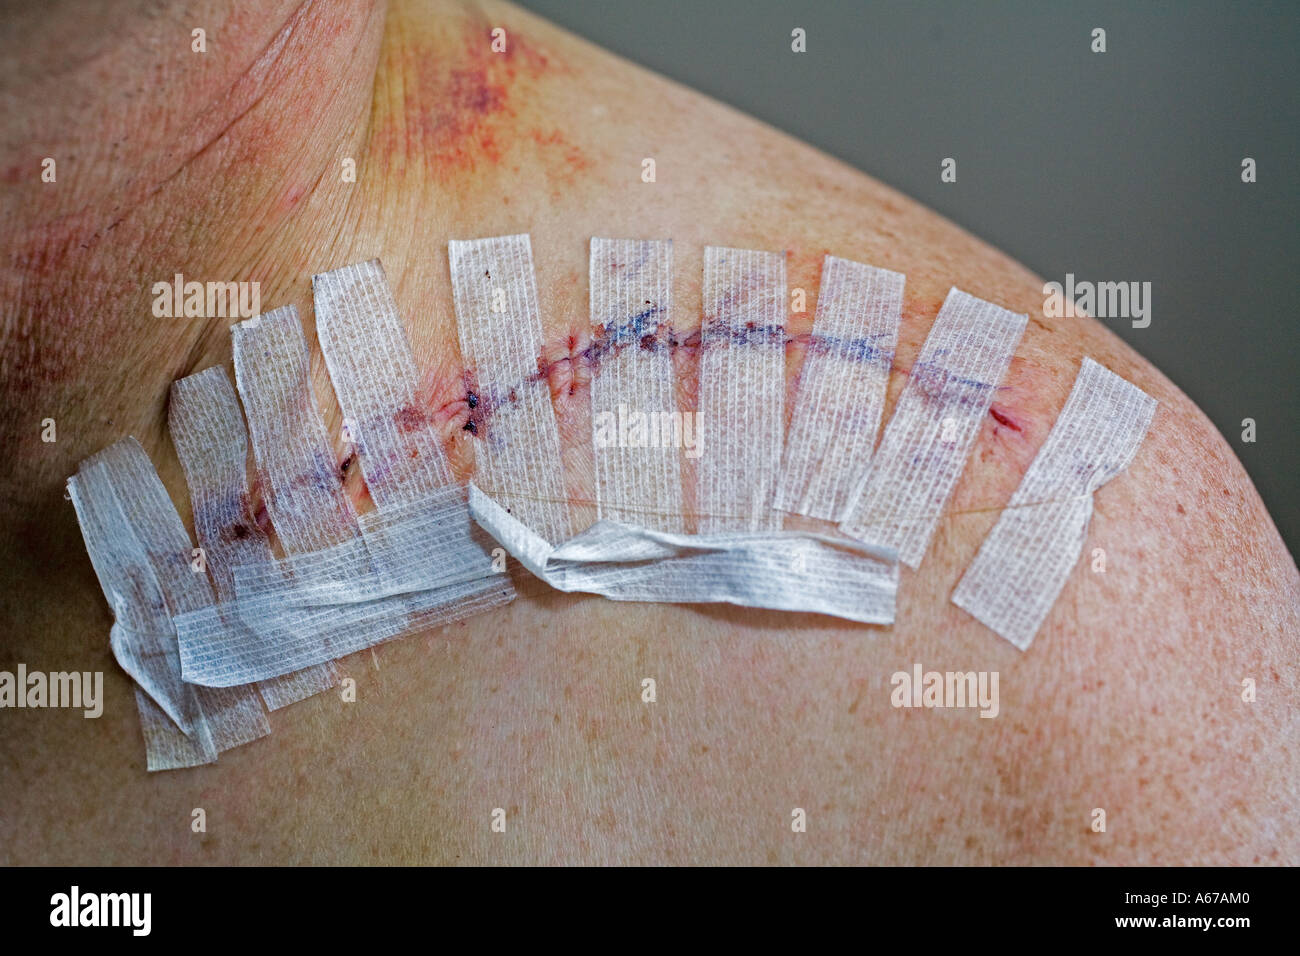 An incision covered by steri strips following surgery to repair a broken collarbone Stock Photo